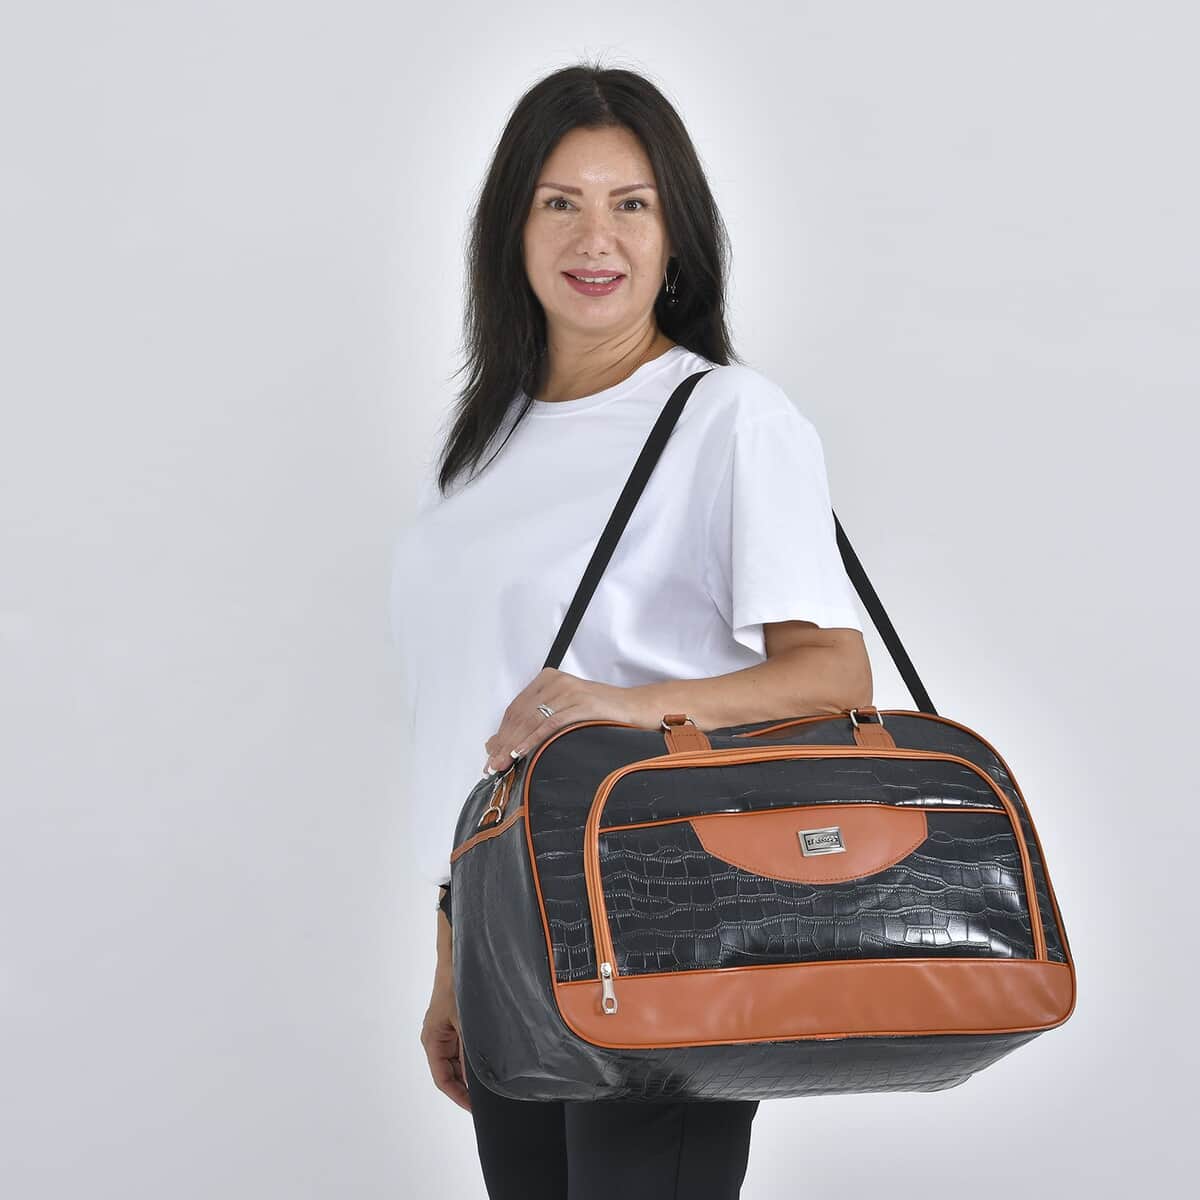 TLV PASSAGE Black Crocodile Embossed Faux Leather Travel Tote Bag (21.65"x8.5"x13.39") with Shoulder Strap image number 1